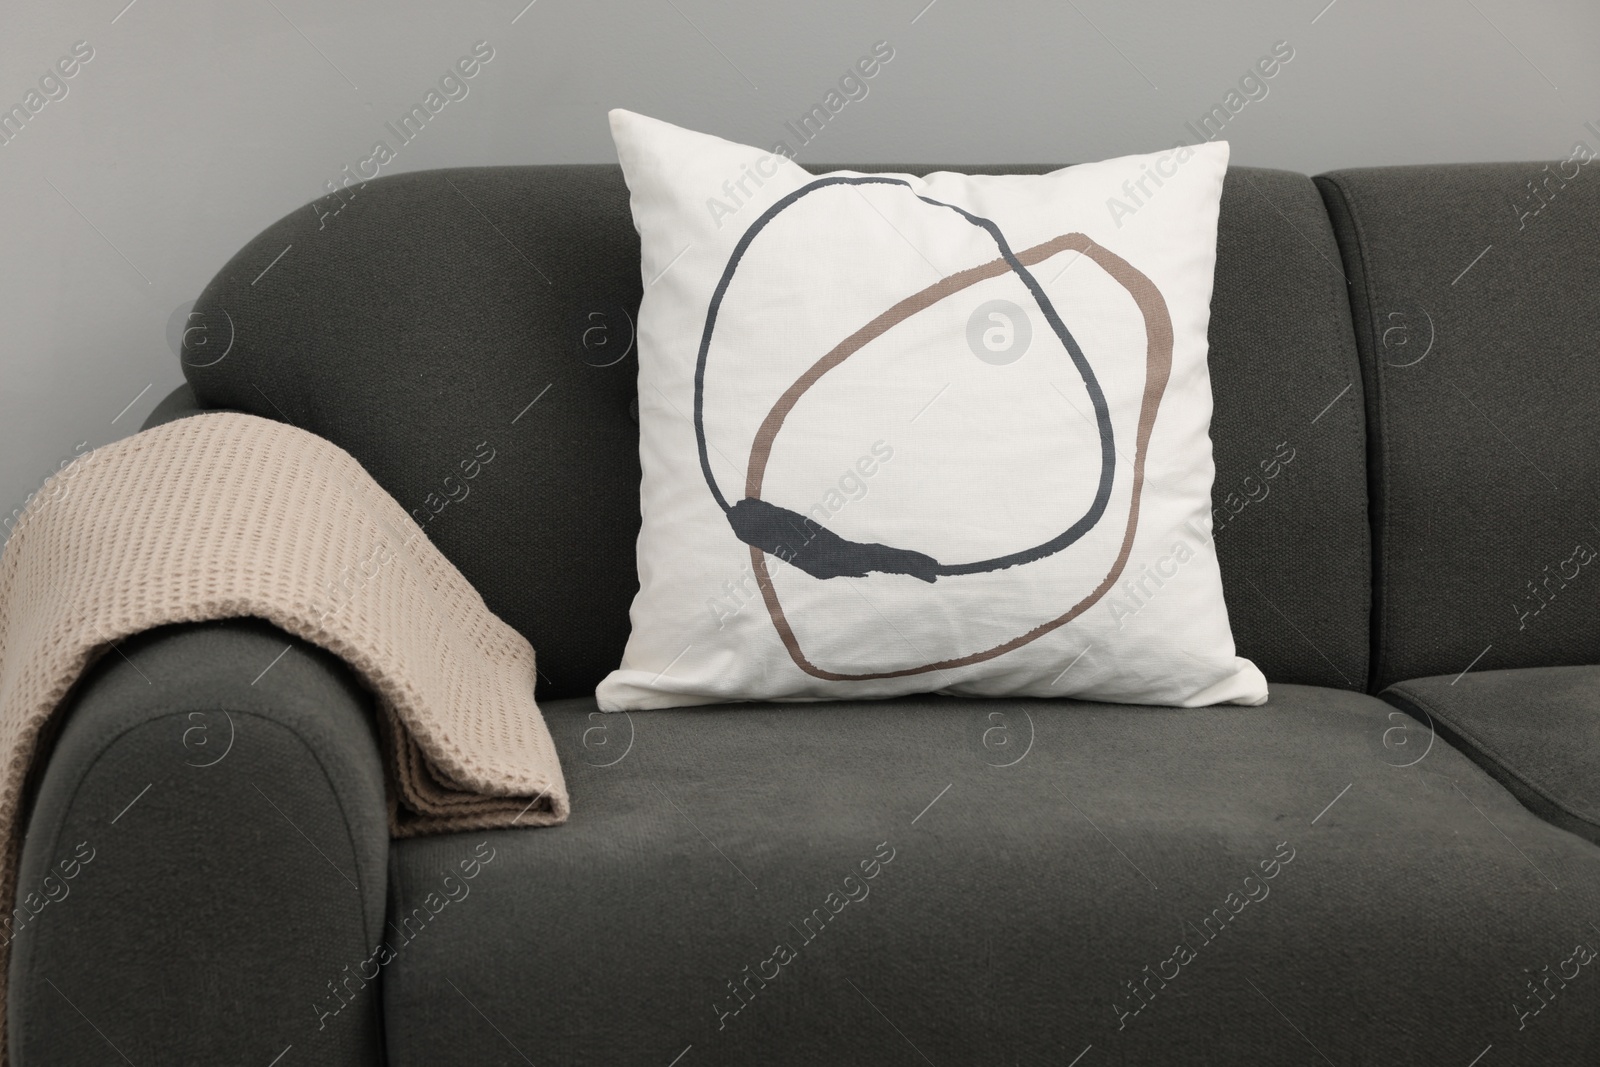 Photo of Soft pillow and blanket on sofa near grey wall indoors